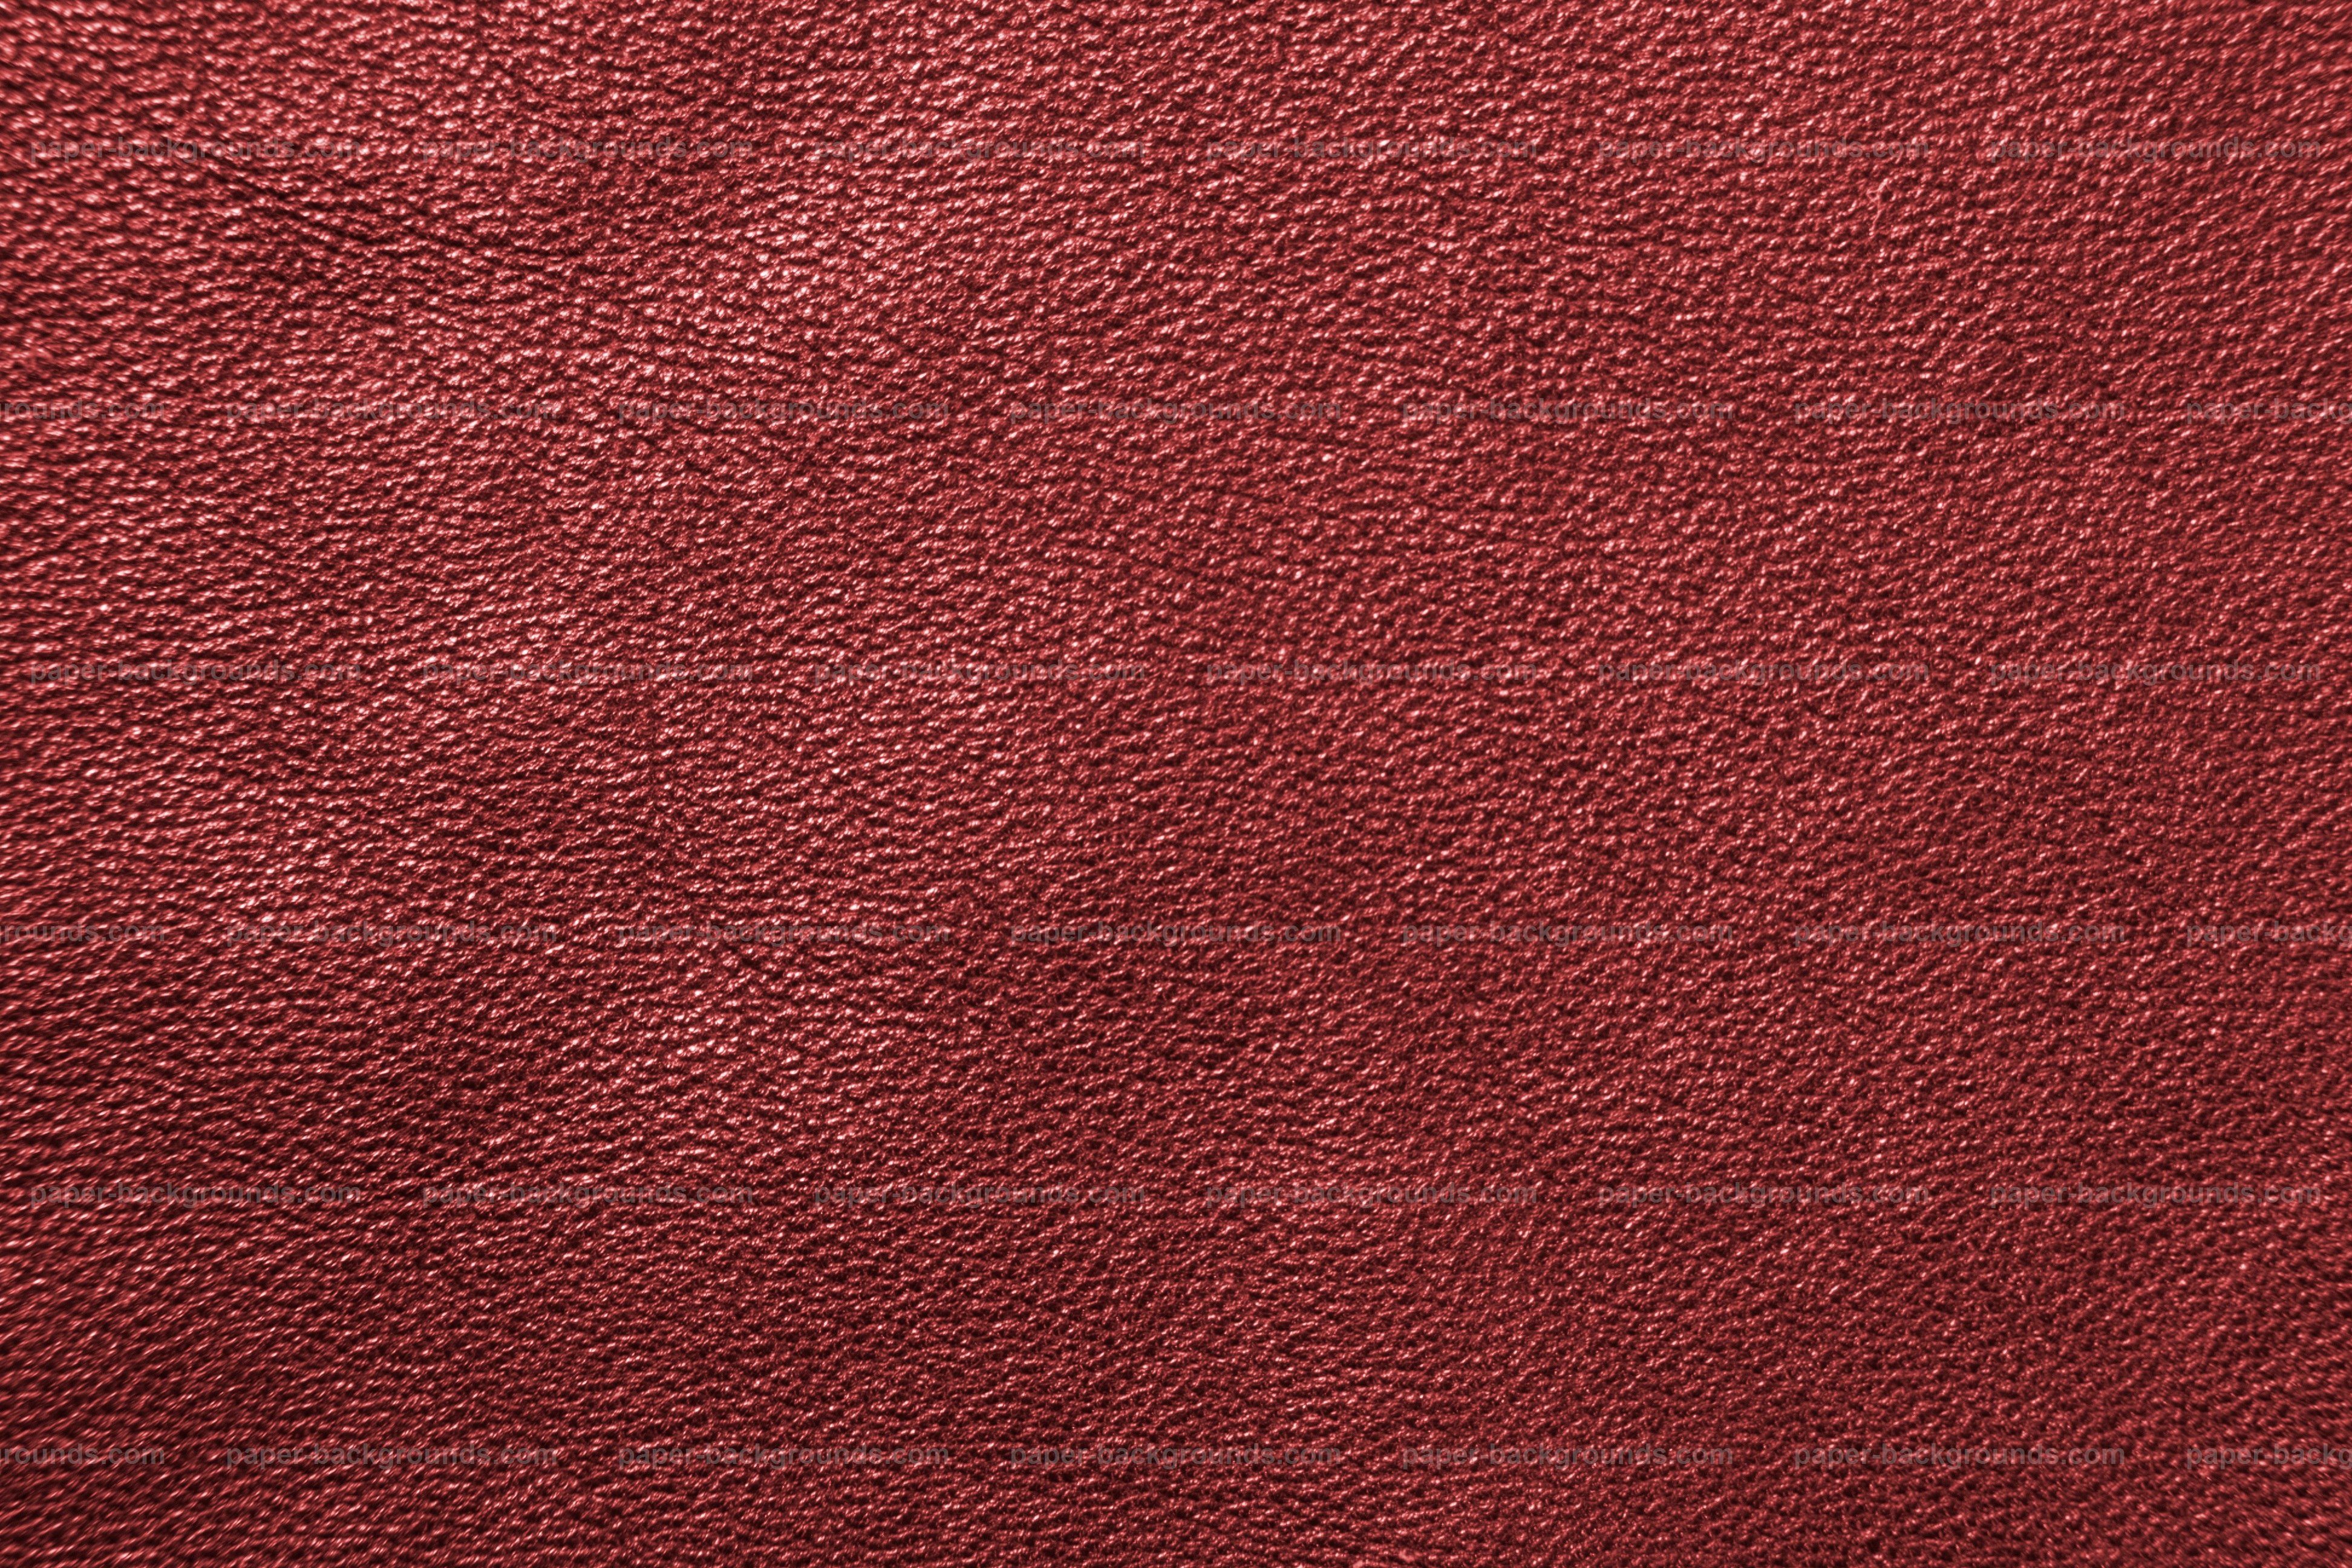 Red Leather Macro Texture Paper Backgrounds